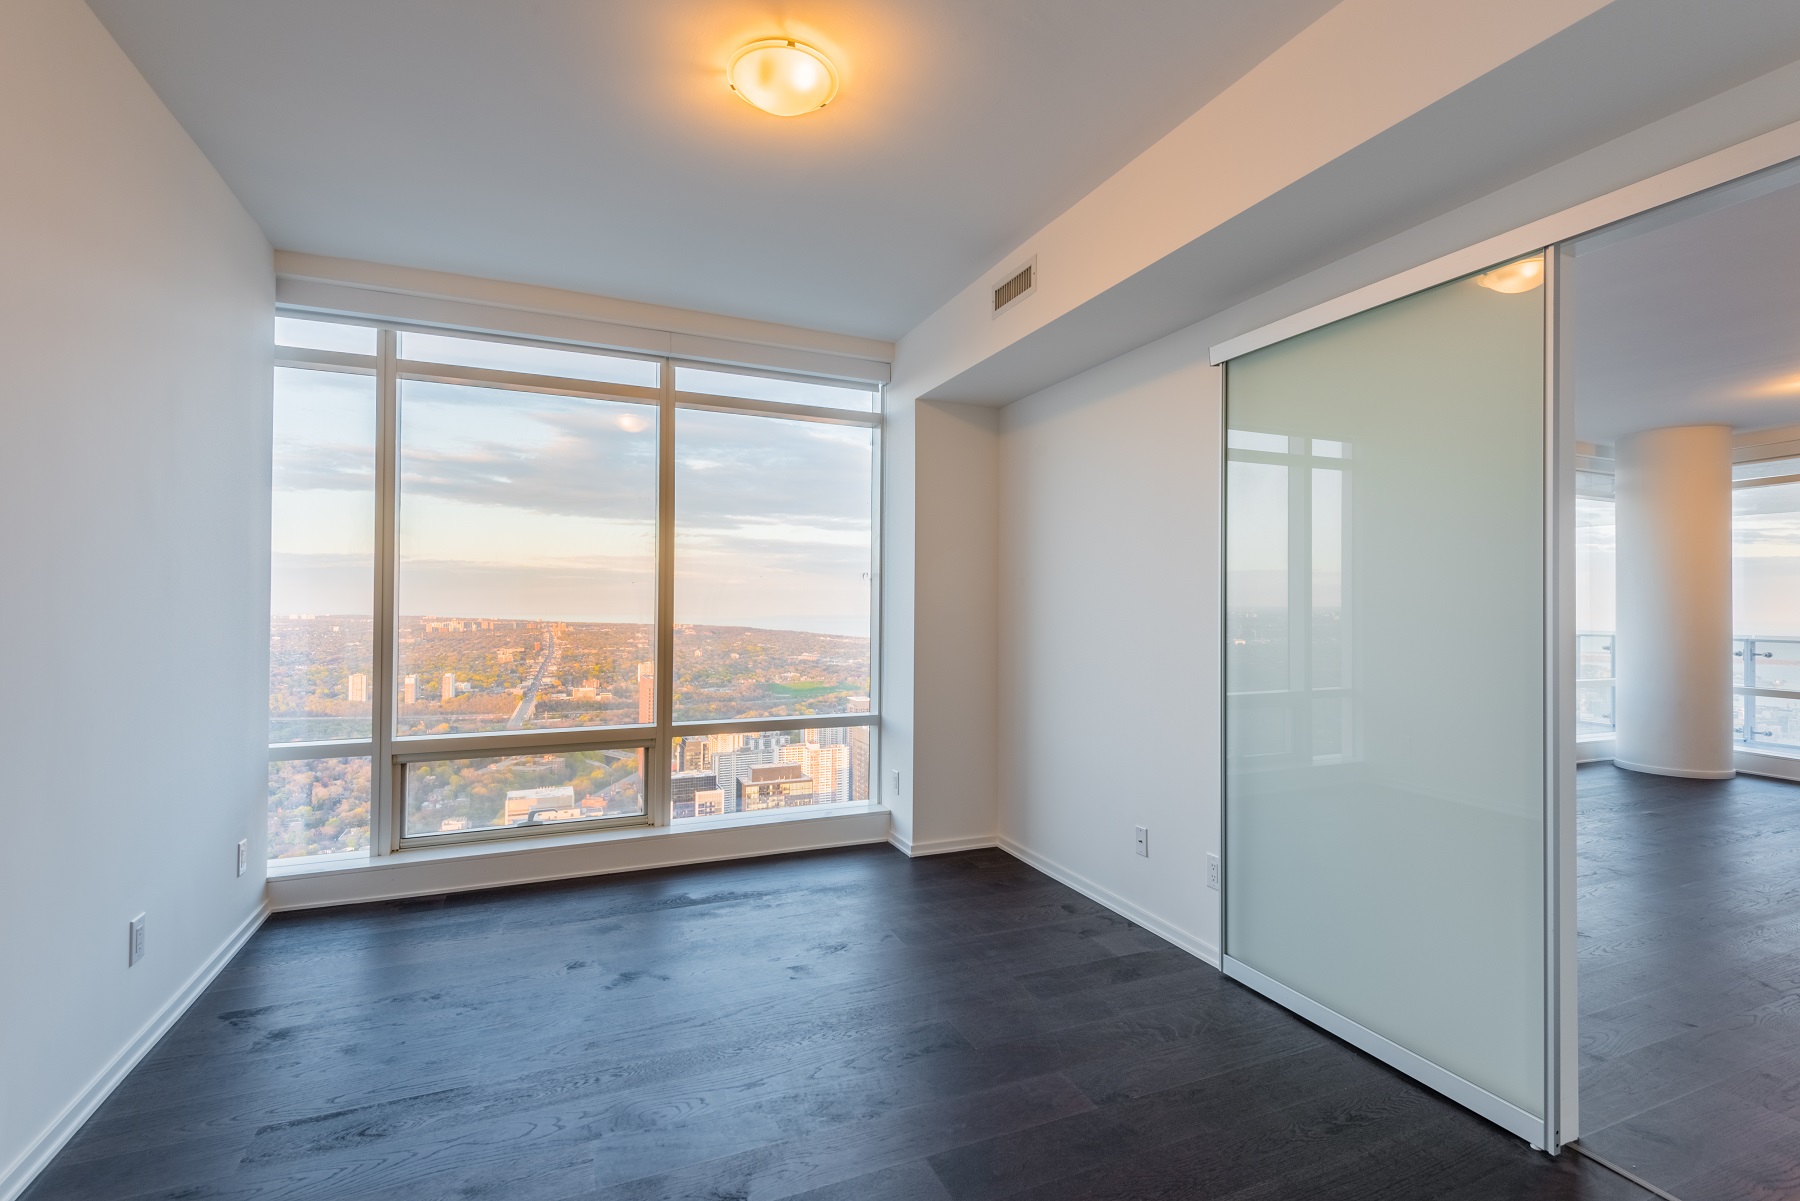 The master bedroom is tall, spacious and offers scenic views of Toronto.